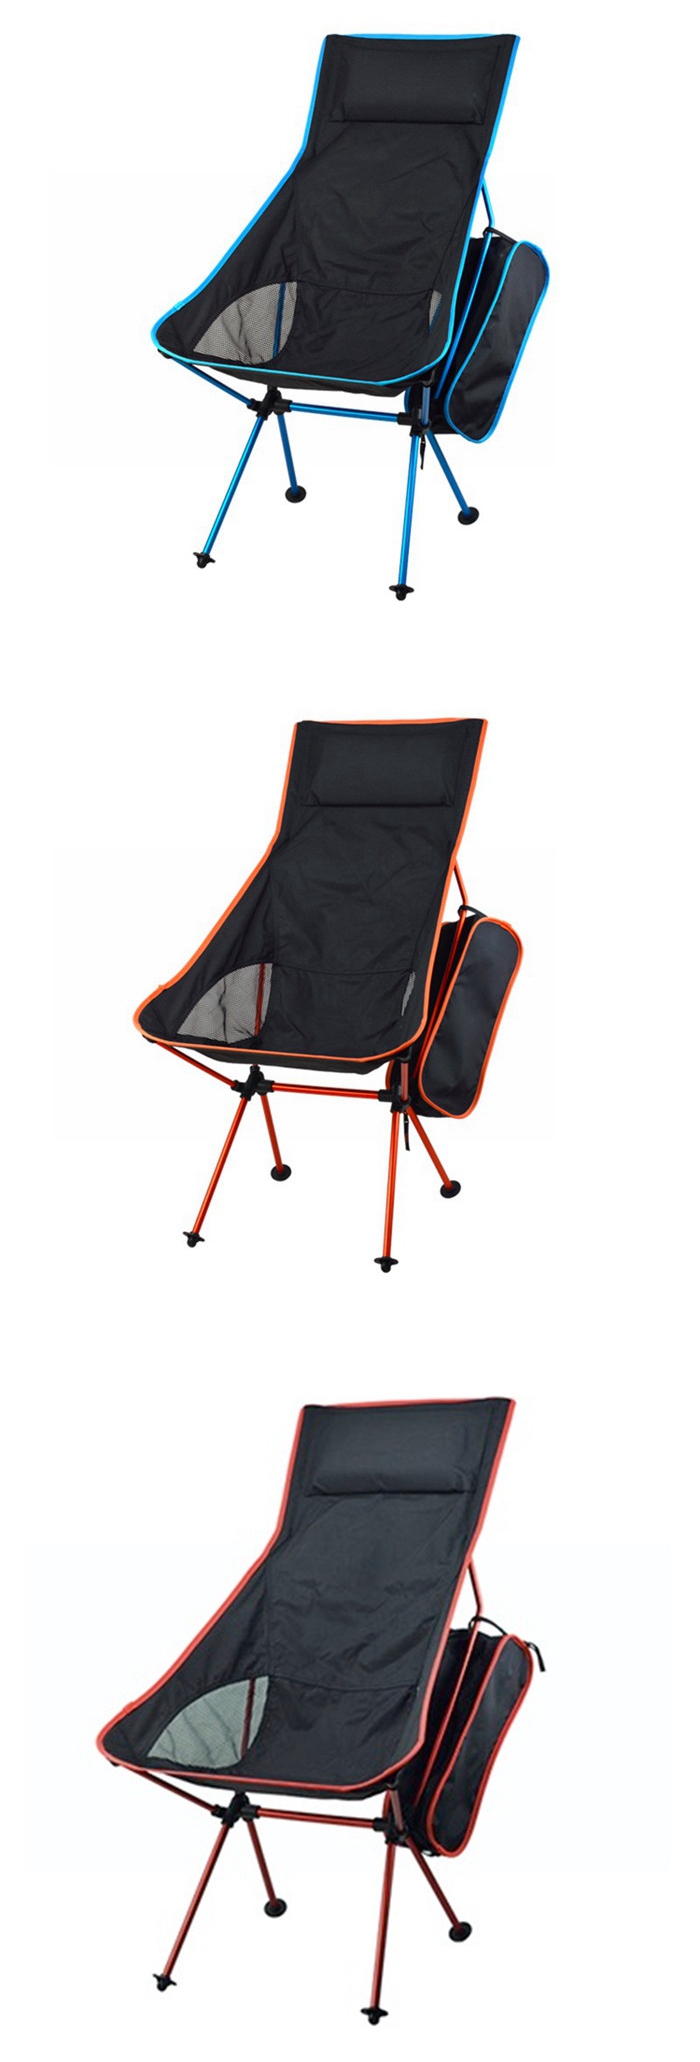 Outdooors Portable Light Weight Folding Fishing Chair Camping Stool Chair With Comfortable Pouch